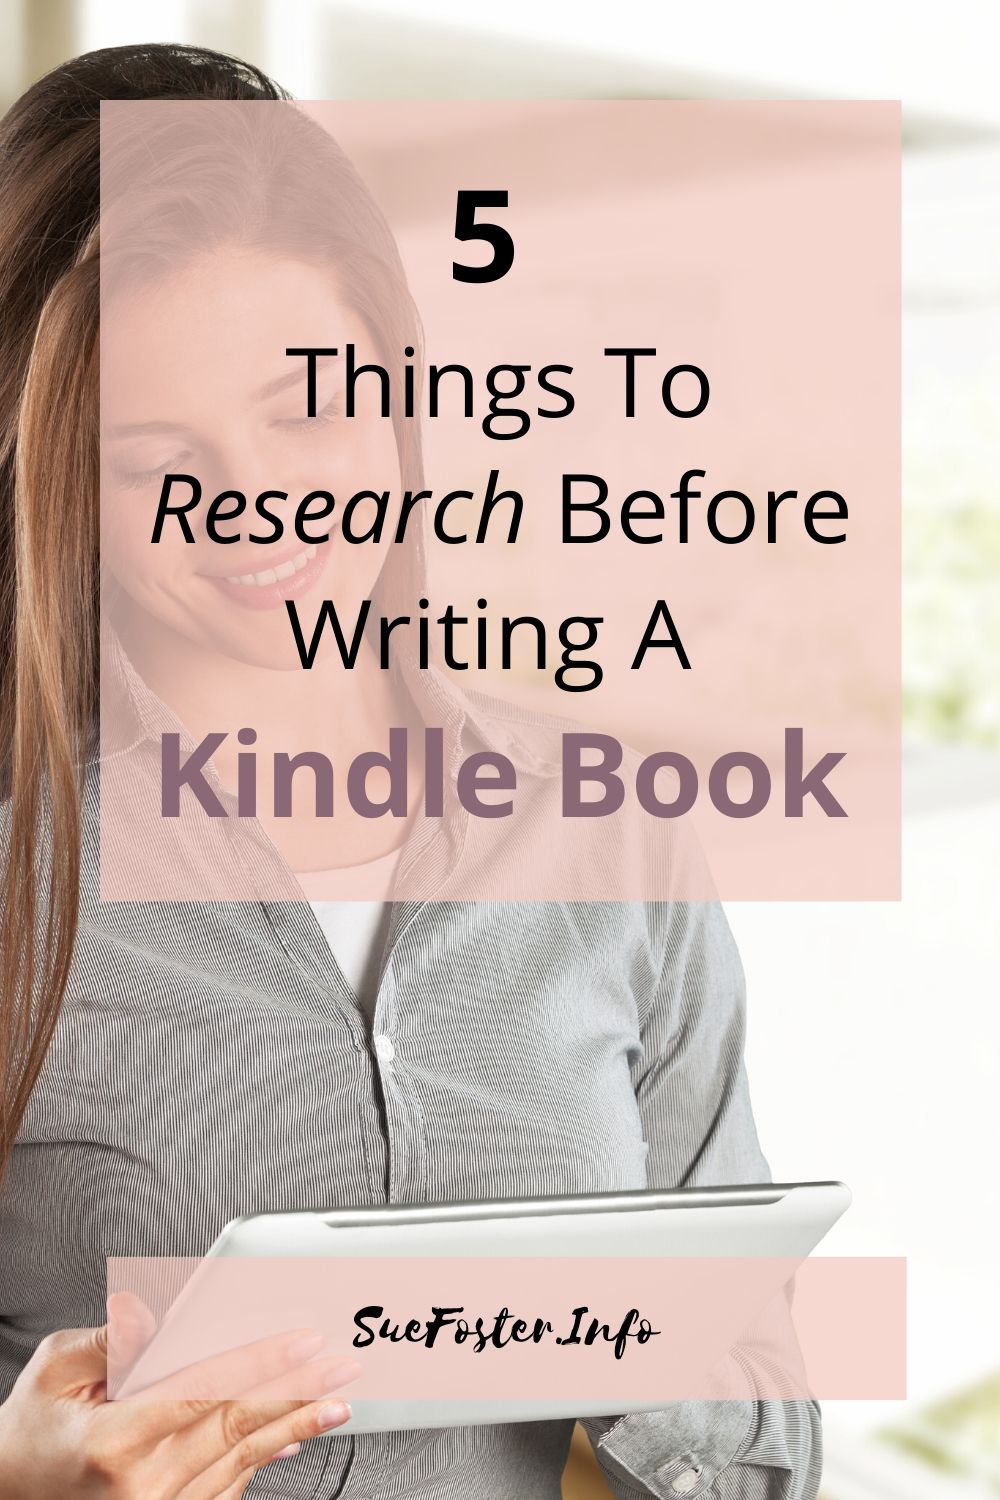 Whatever your reason for writing a Kindle book, you shouldn’t blindly jump into this new project. Instead, you’ll want to take your time and do your research. 